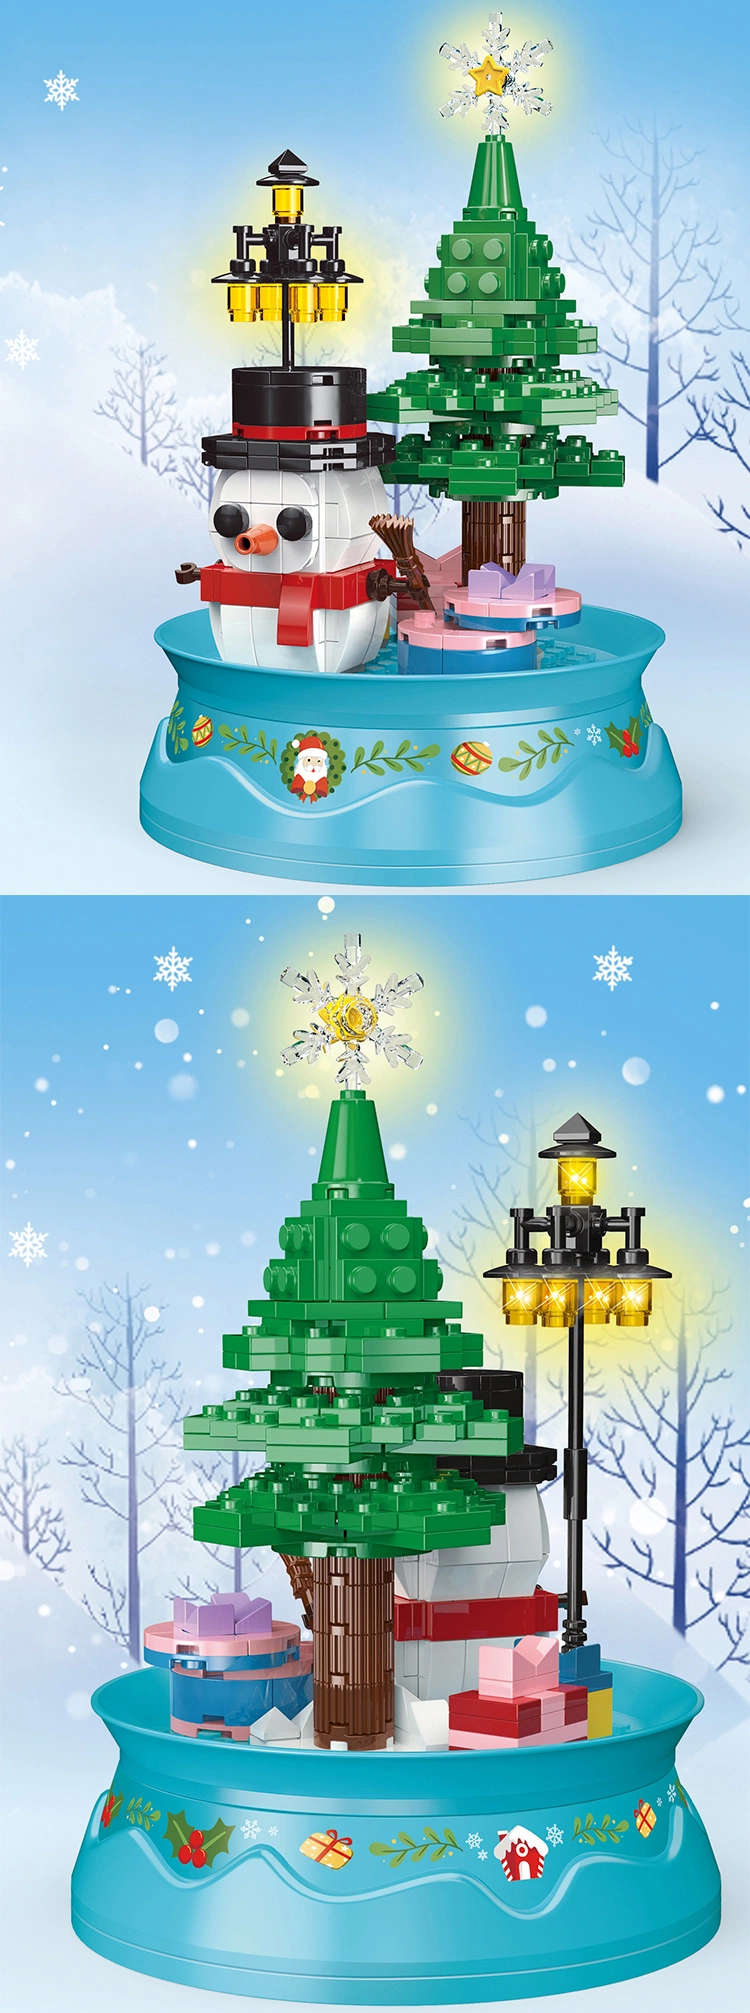 Woma Toys Wholesale Customize Kids Christmas Birthday Gifts Snow Man Model Collectible Spin Music Box DIY Small Brick Building Blocks Set DIY Game Toy